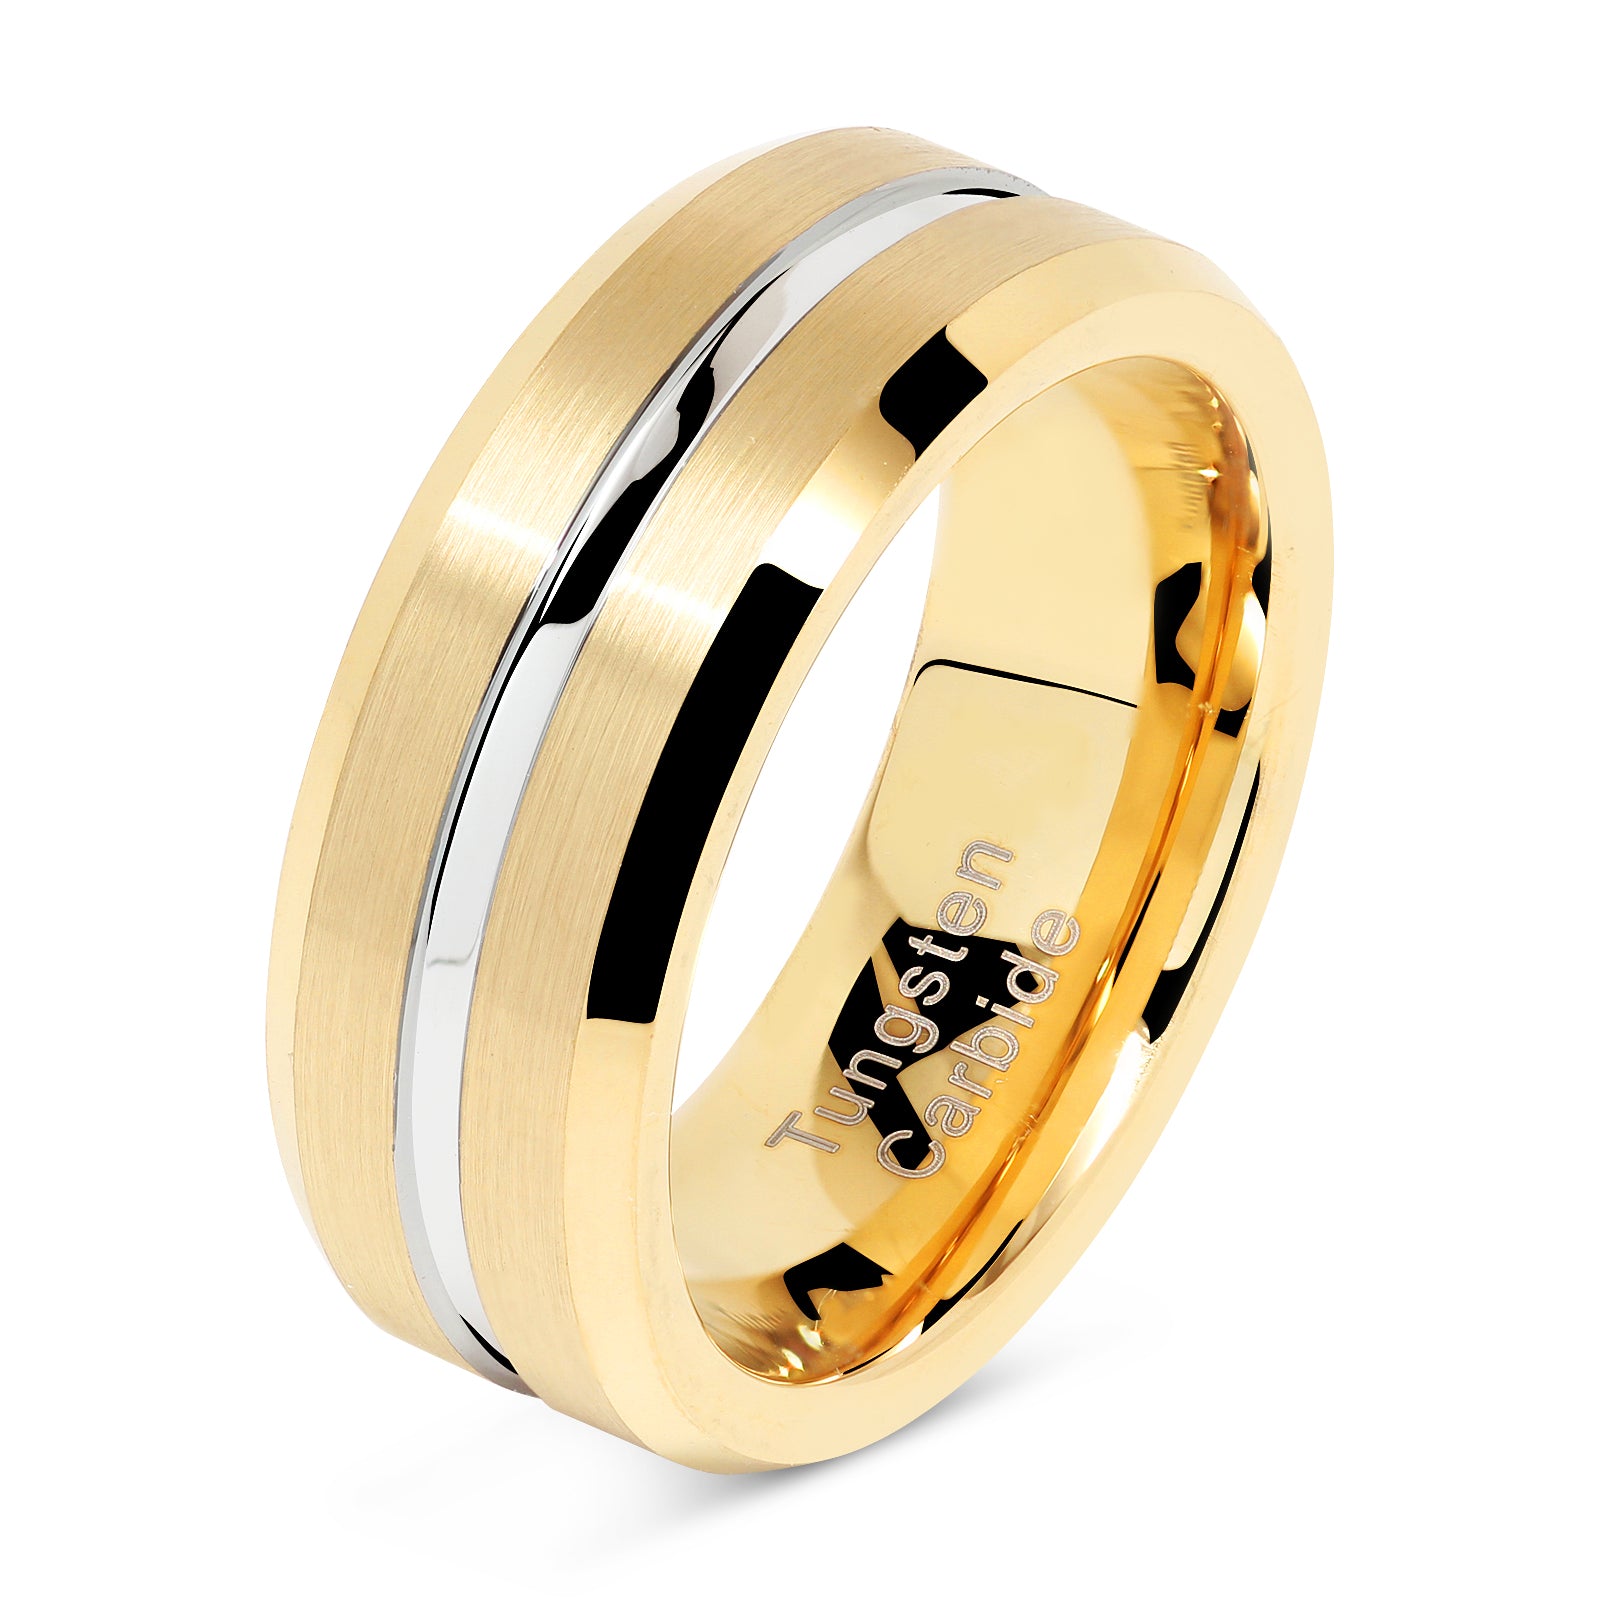 tijdschrift Pamflet motief Tungsten Rings for Mens Gold Wedding Bands Silver Grooved Two Tone